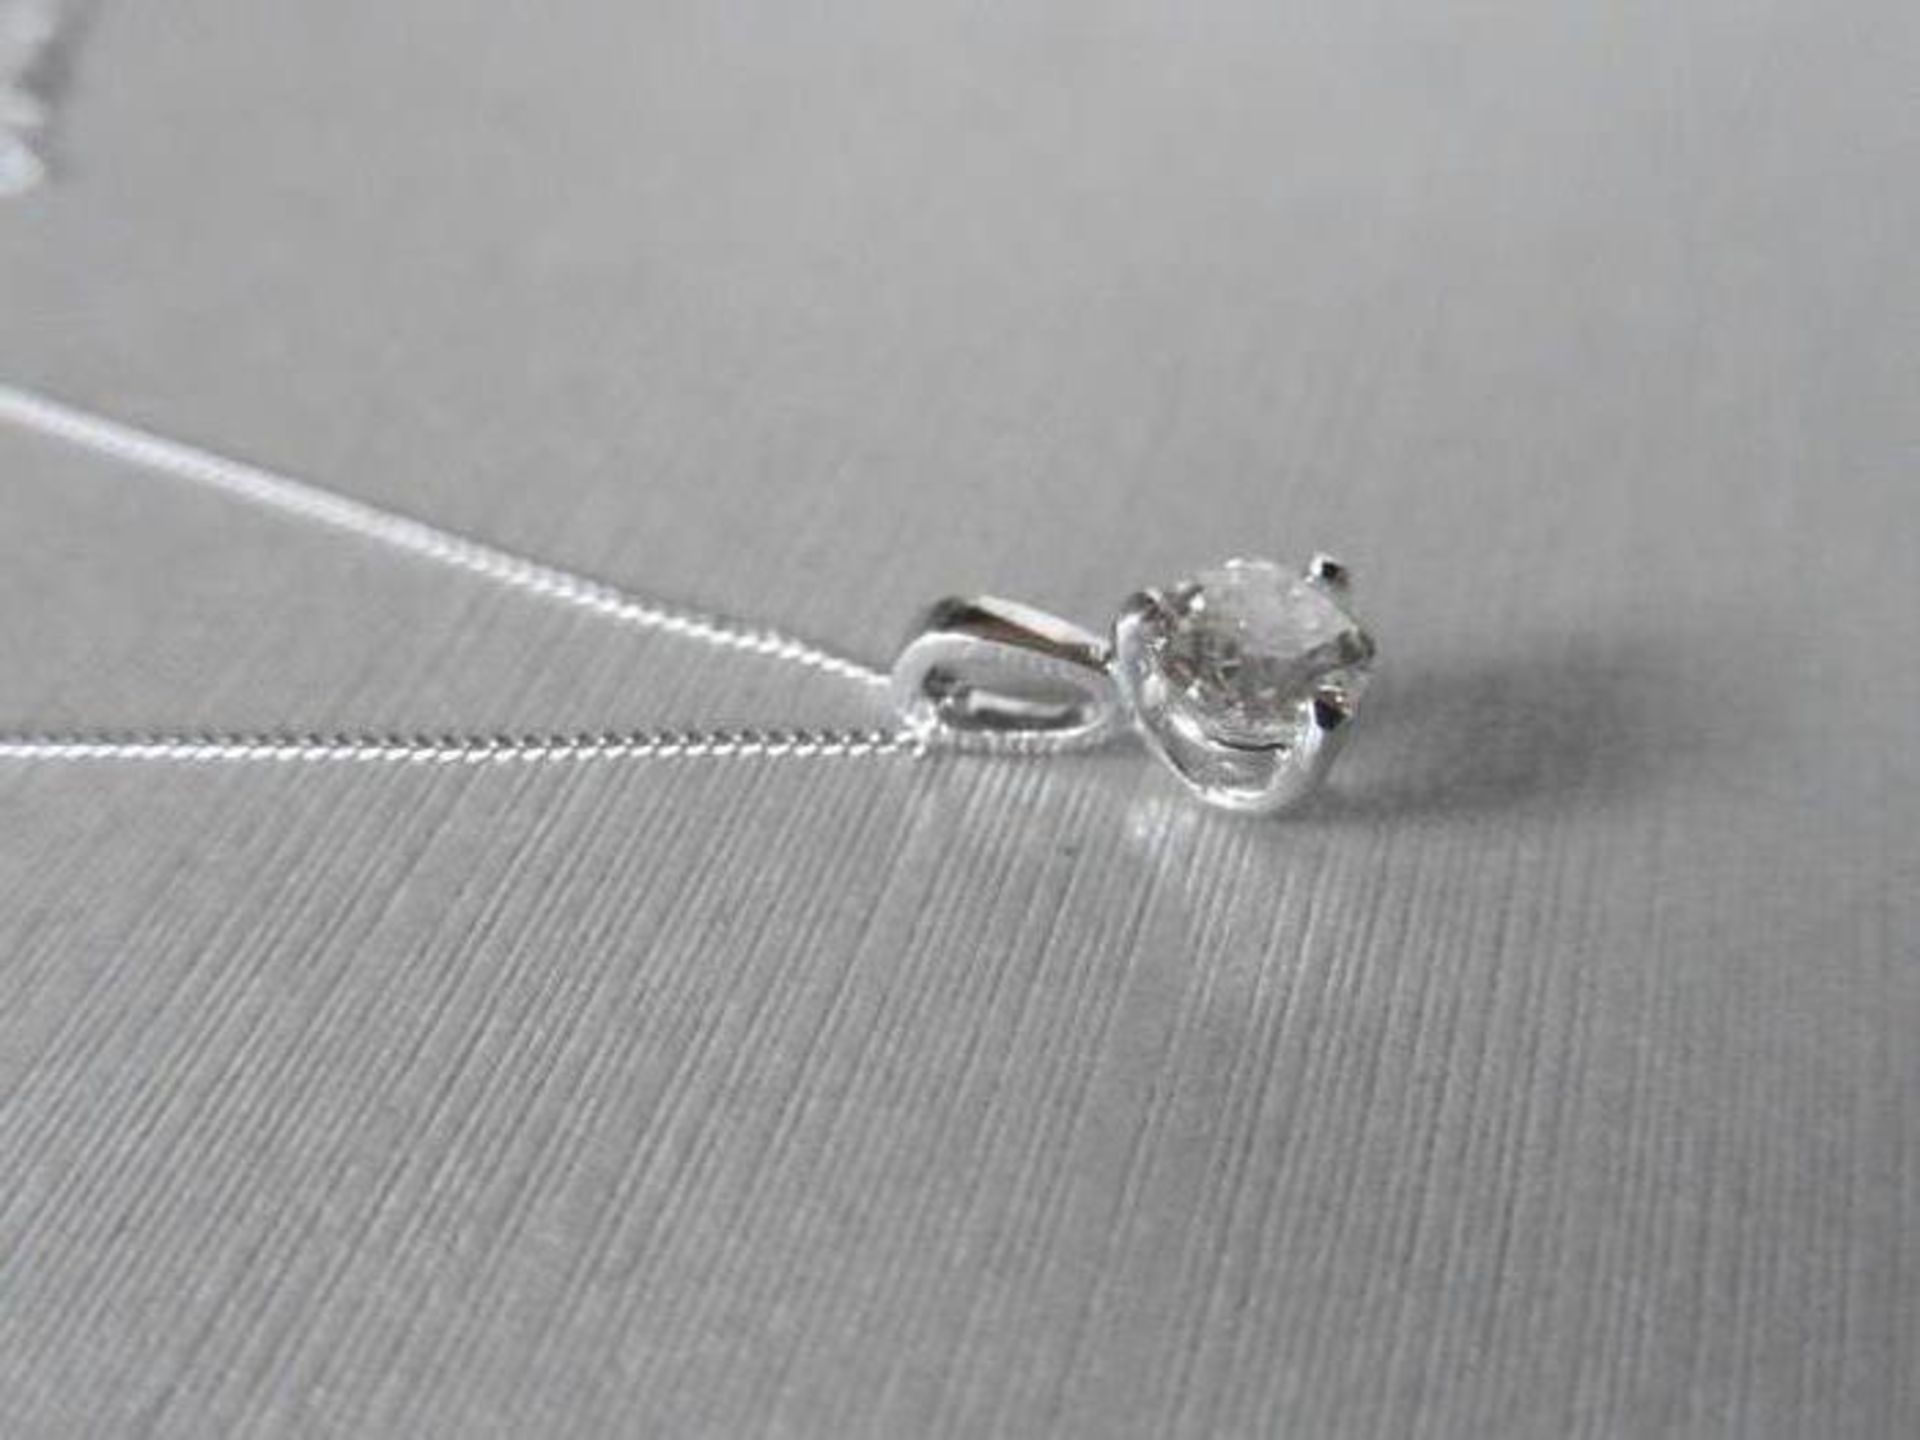 1.00ct diamond solitaire pendant set in a platinum 3 claw setting. H colour and Si2 clarity. 9ct - Image 2 of 3